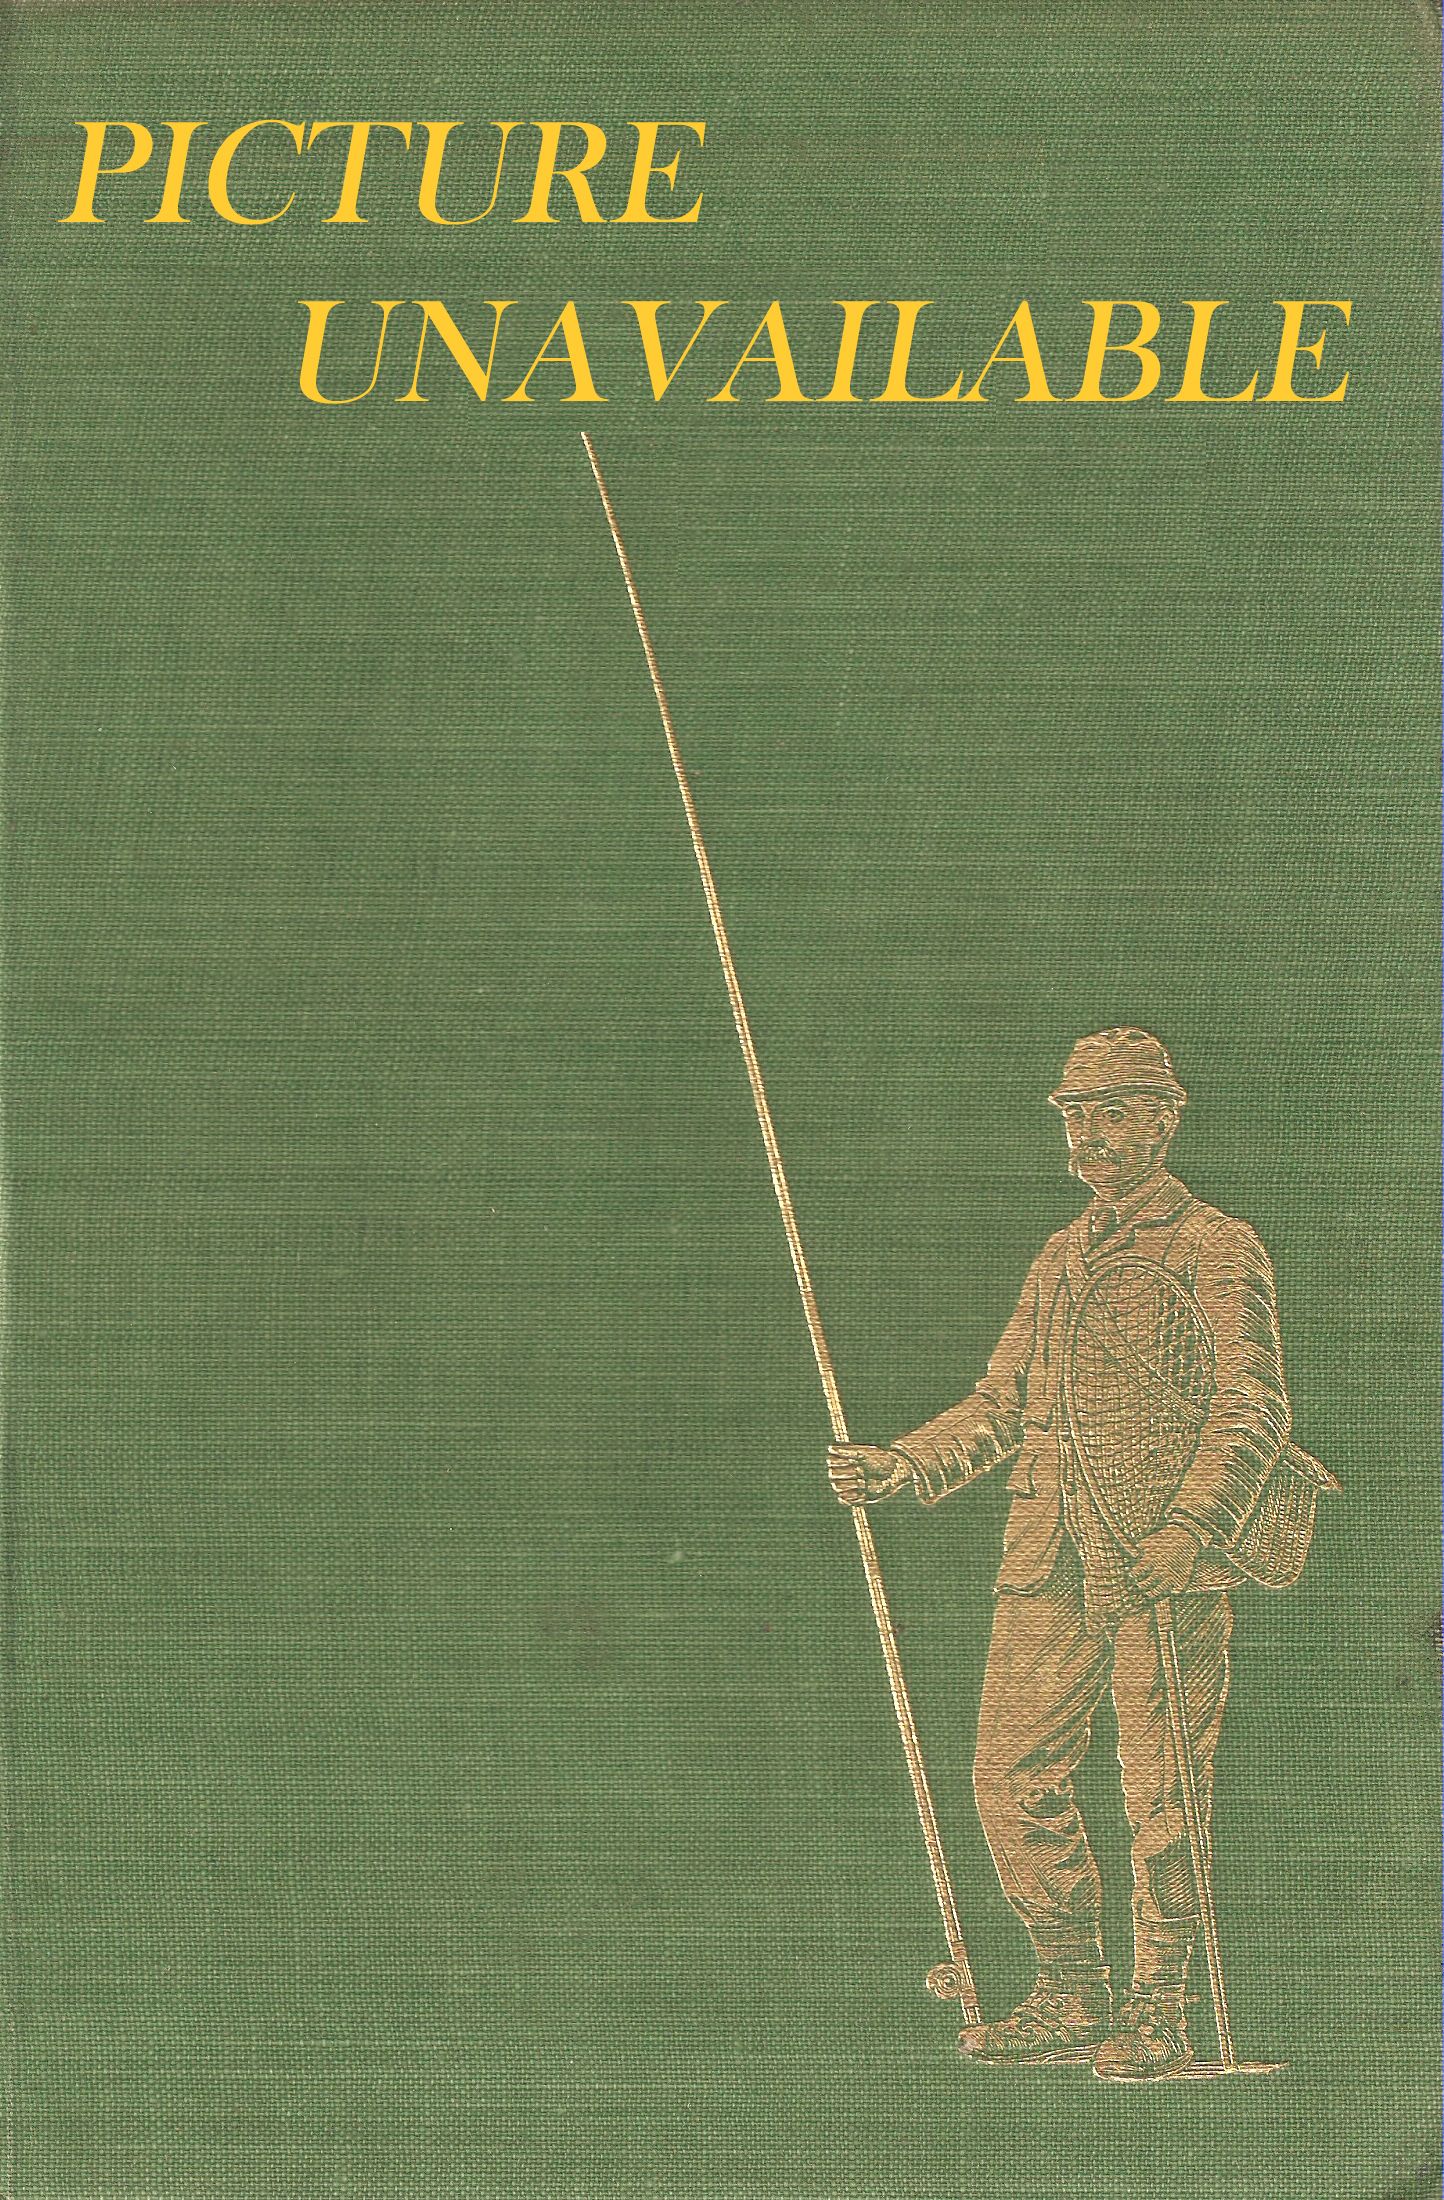 ALEXANDER AND ANGLING. By R. Sinclair Carr. (